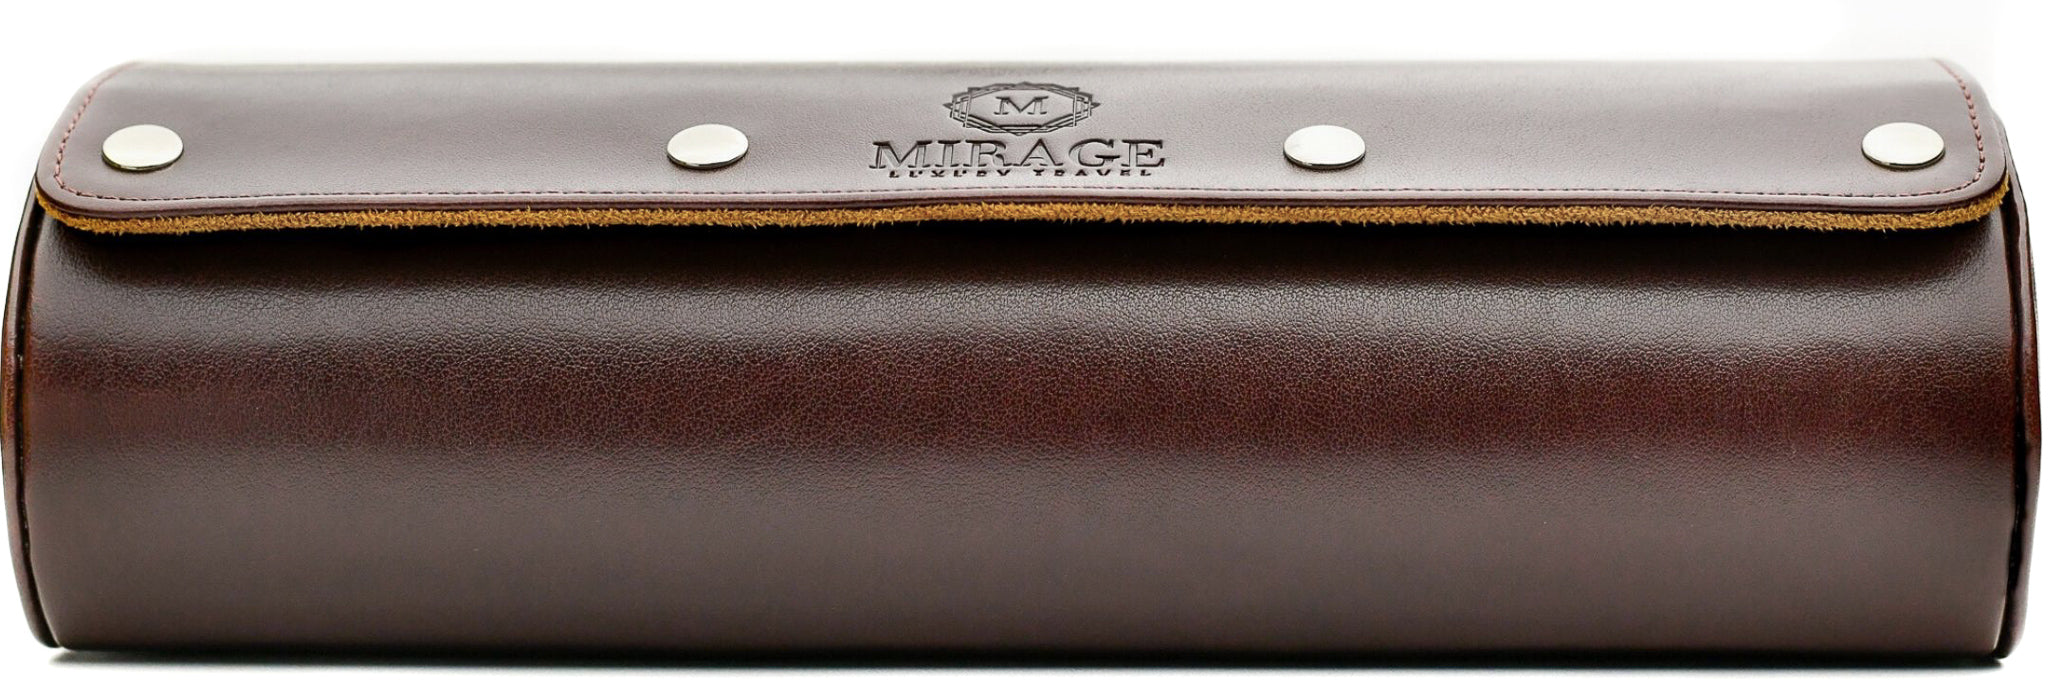 Tawny Brown Cow Leather Watch Roll - 3 Watches – MIRAGE LUXURY TRAVEL